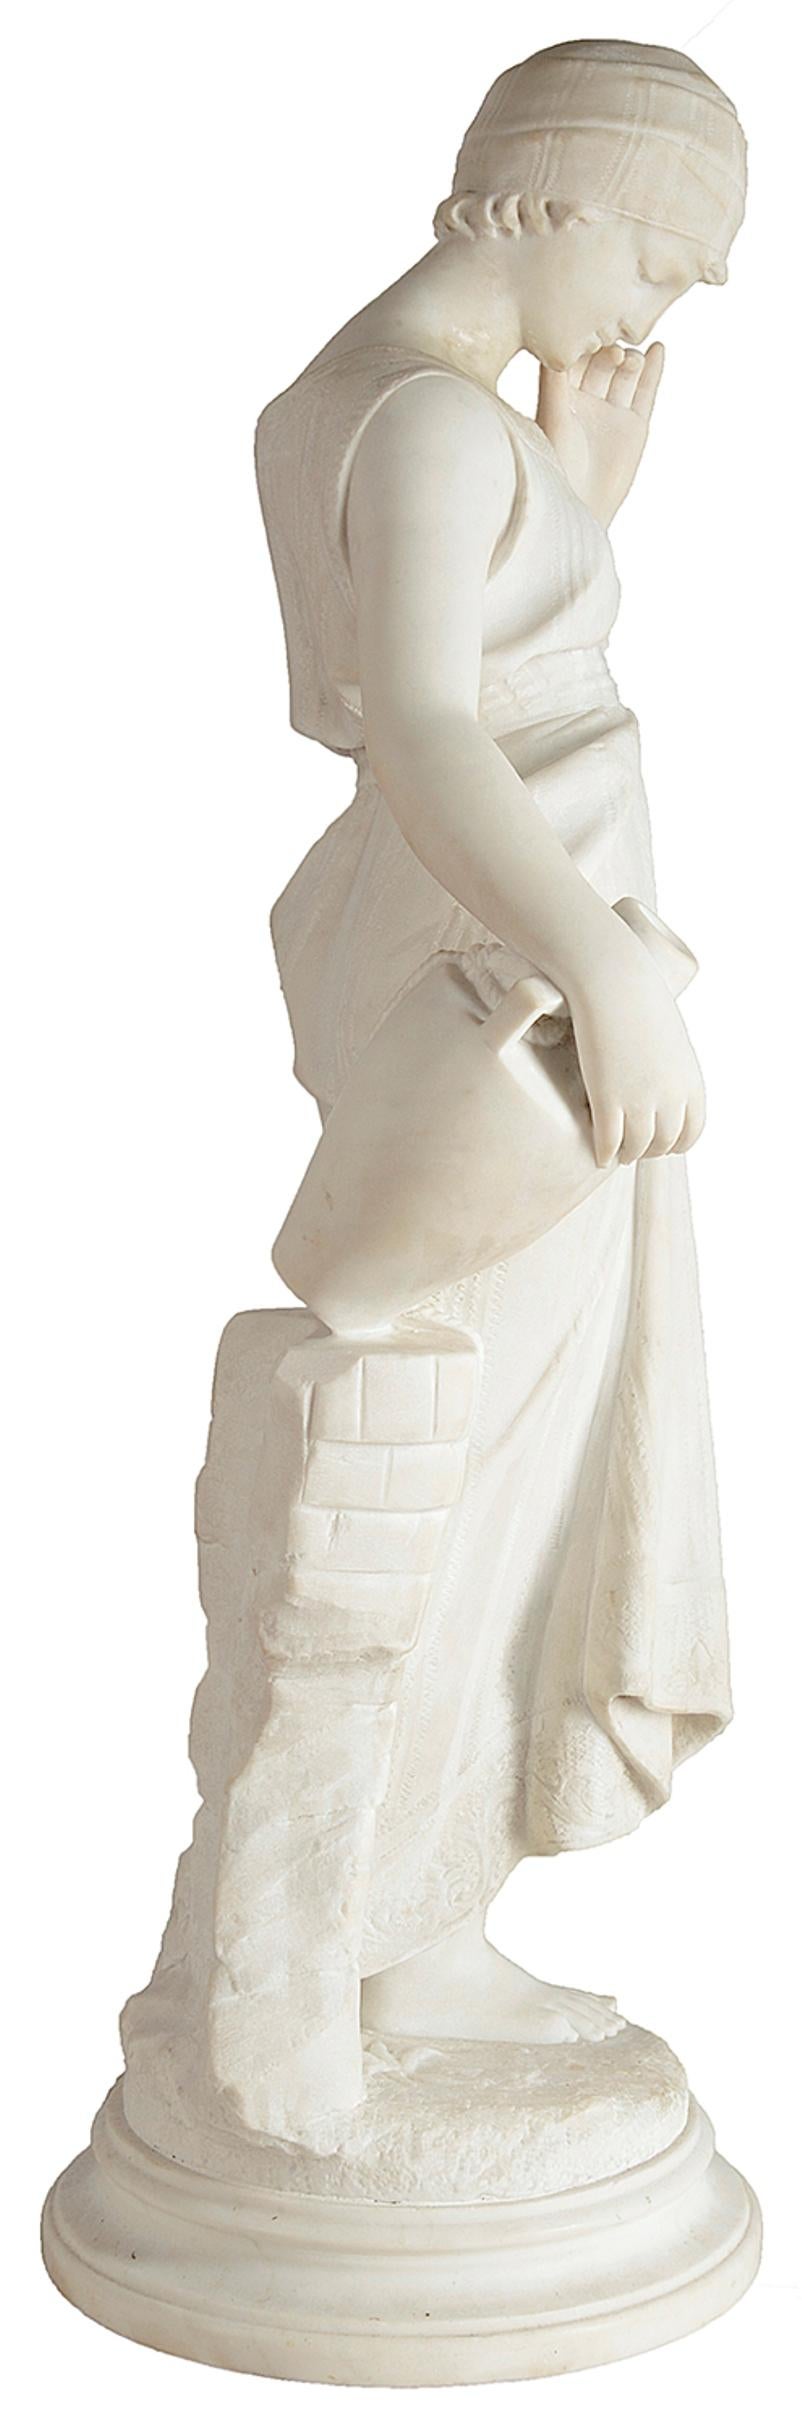 Carved Classical 19th Century Marble Statue of Maiden Holding a Water Jug